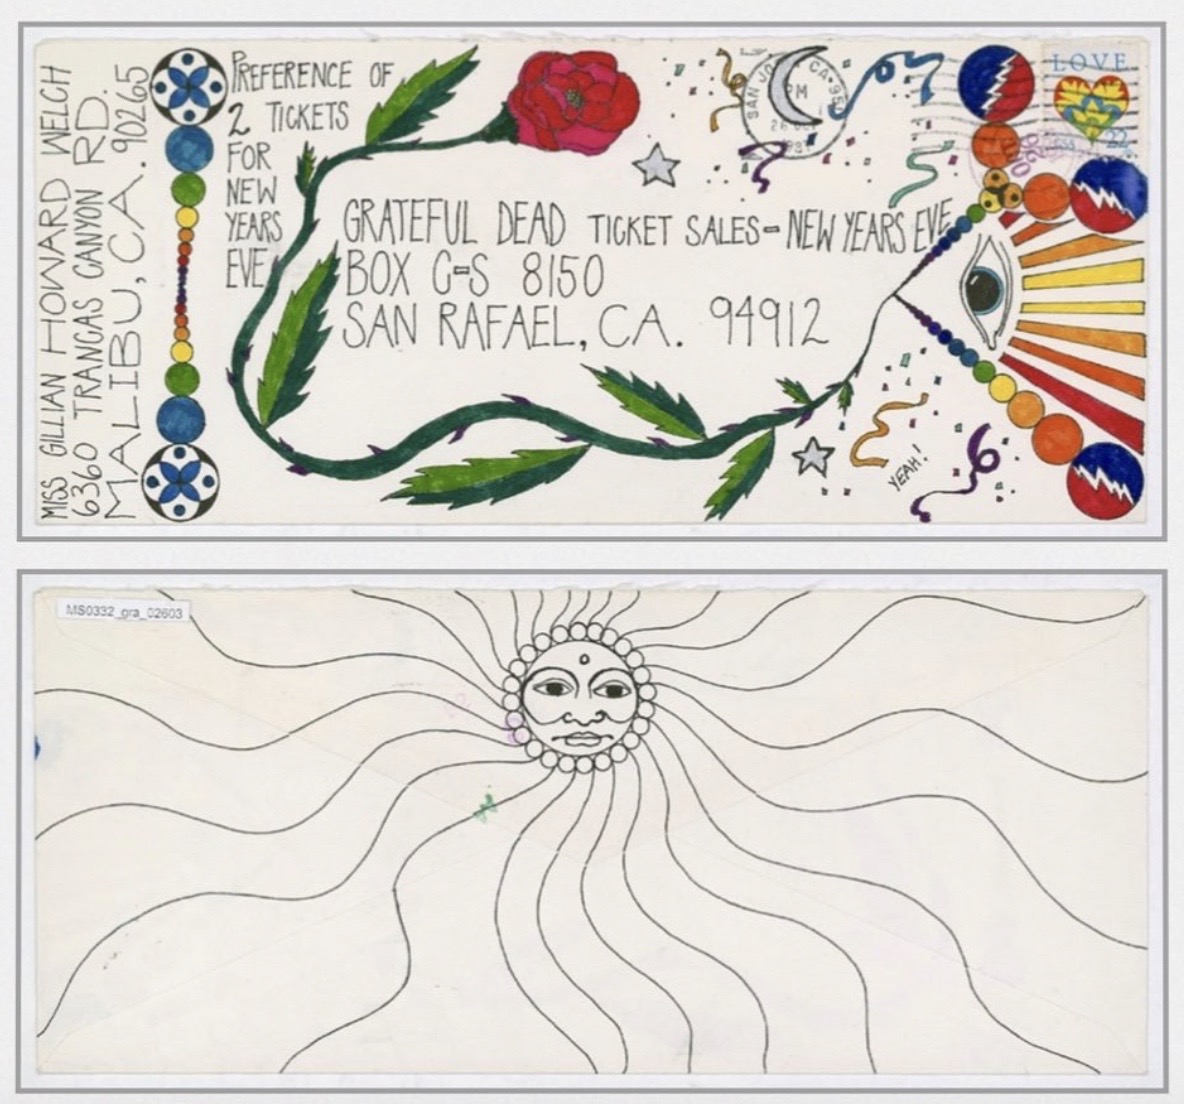 This is so wonderful: the hand-decorated envelope that sublime singer-songwriter @GillianWelch sent to the @GratefulDead Ticket Sales office for NYE tickets. I don't know the year. She got the tickets. [via IG: gillianwelchofficial and @maxabelson]